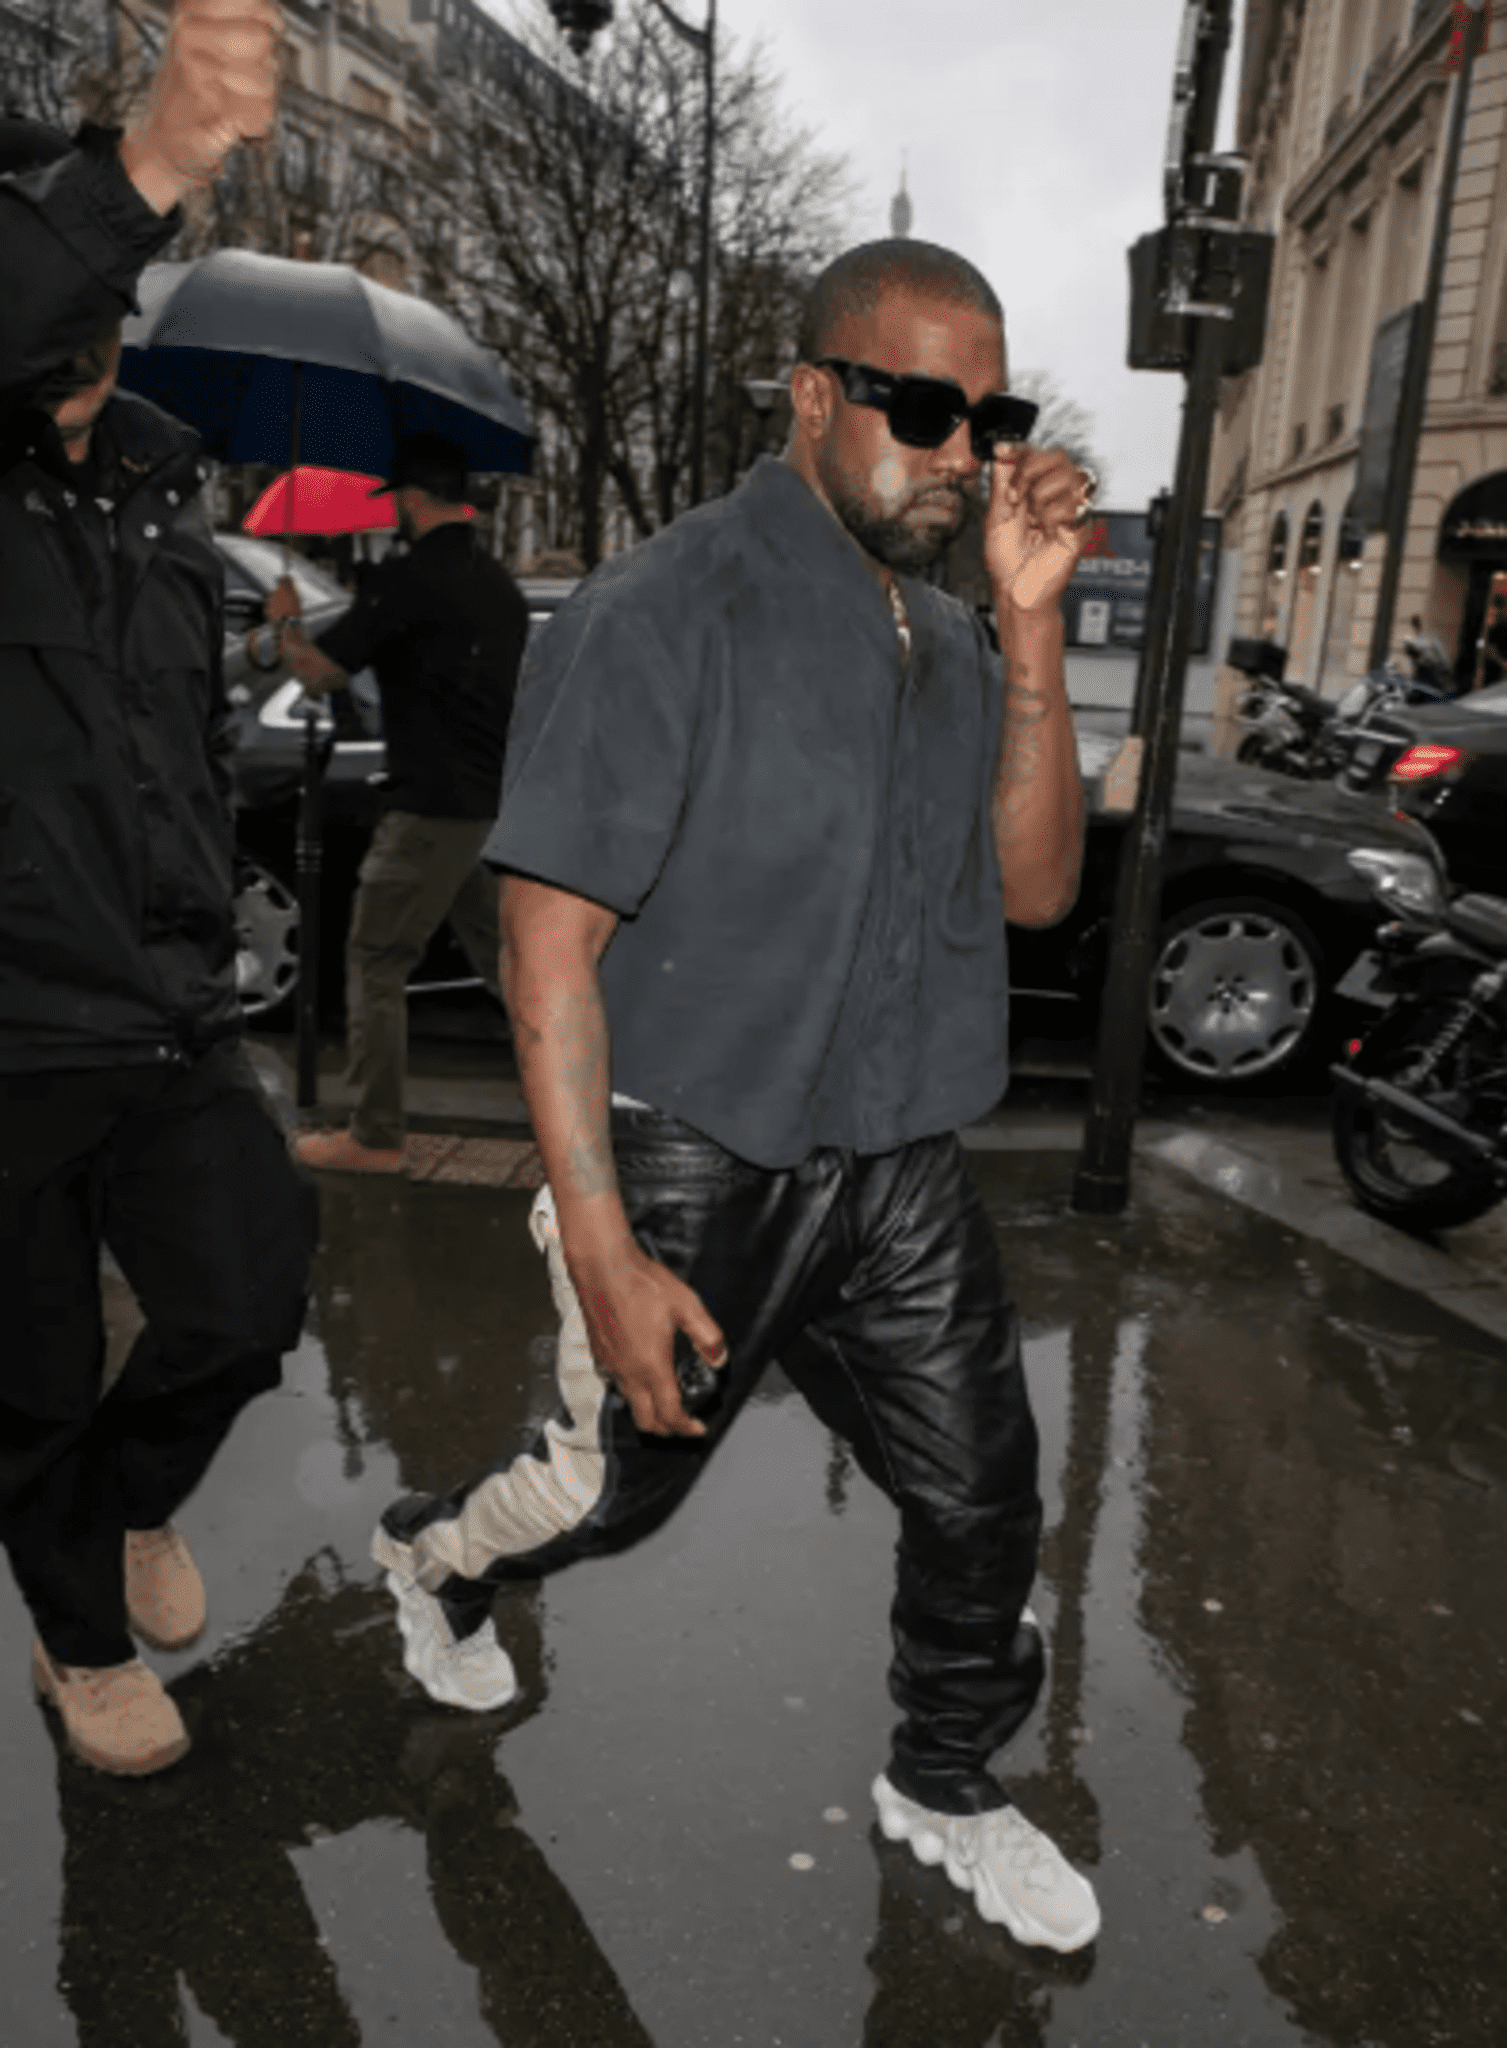 Kanye West was booted out of the Skechers headquarters in Southern California after showing up unannounced.